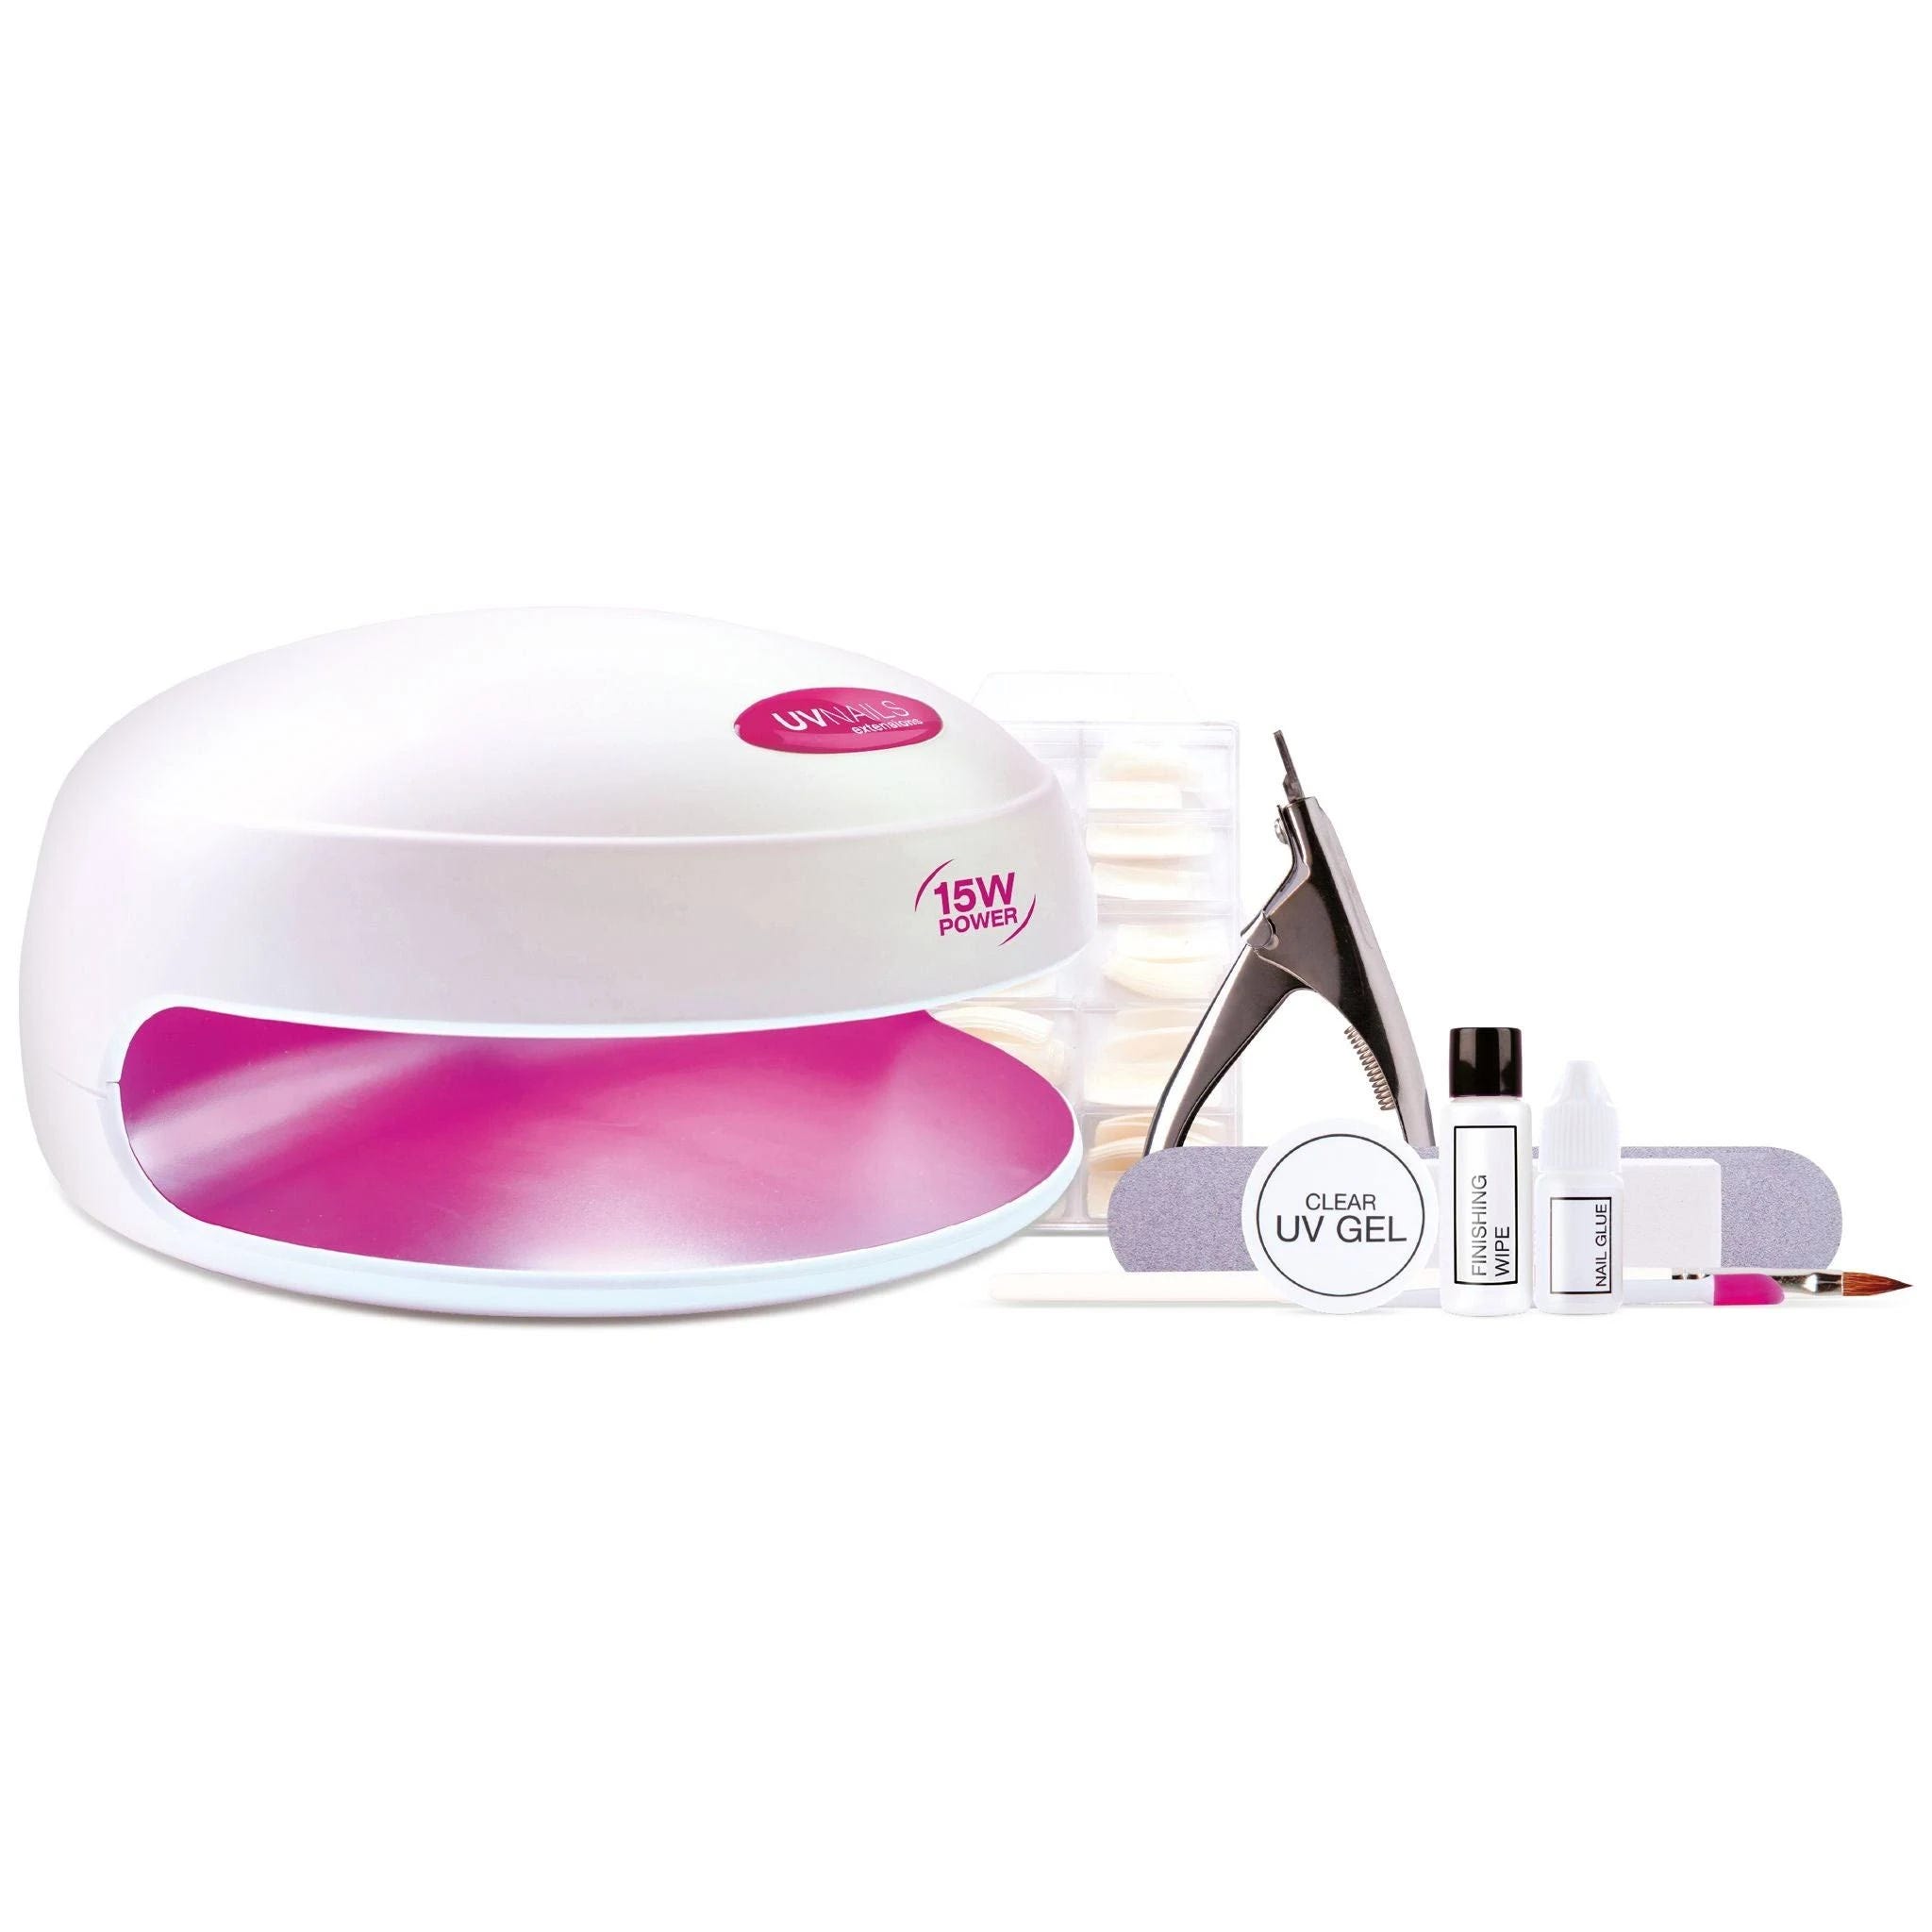 UV Nail Lamp with Natural-Looking Extensions for Salon-Style Nails | Image